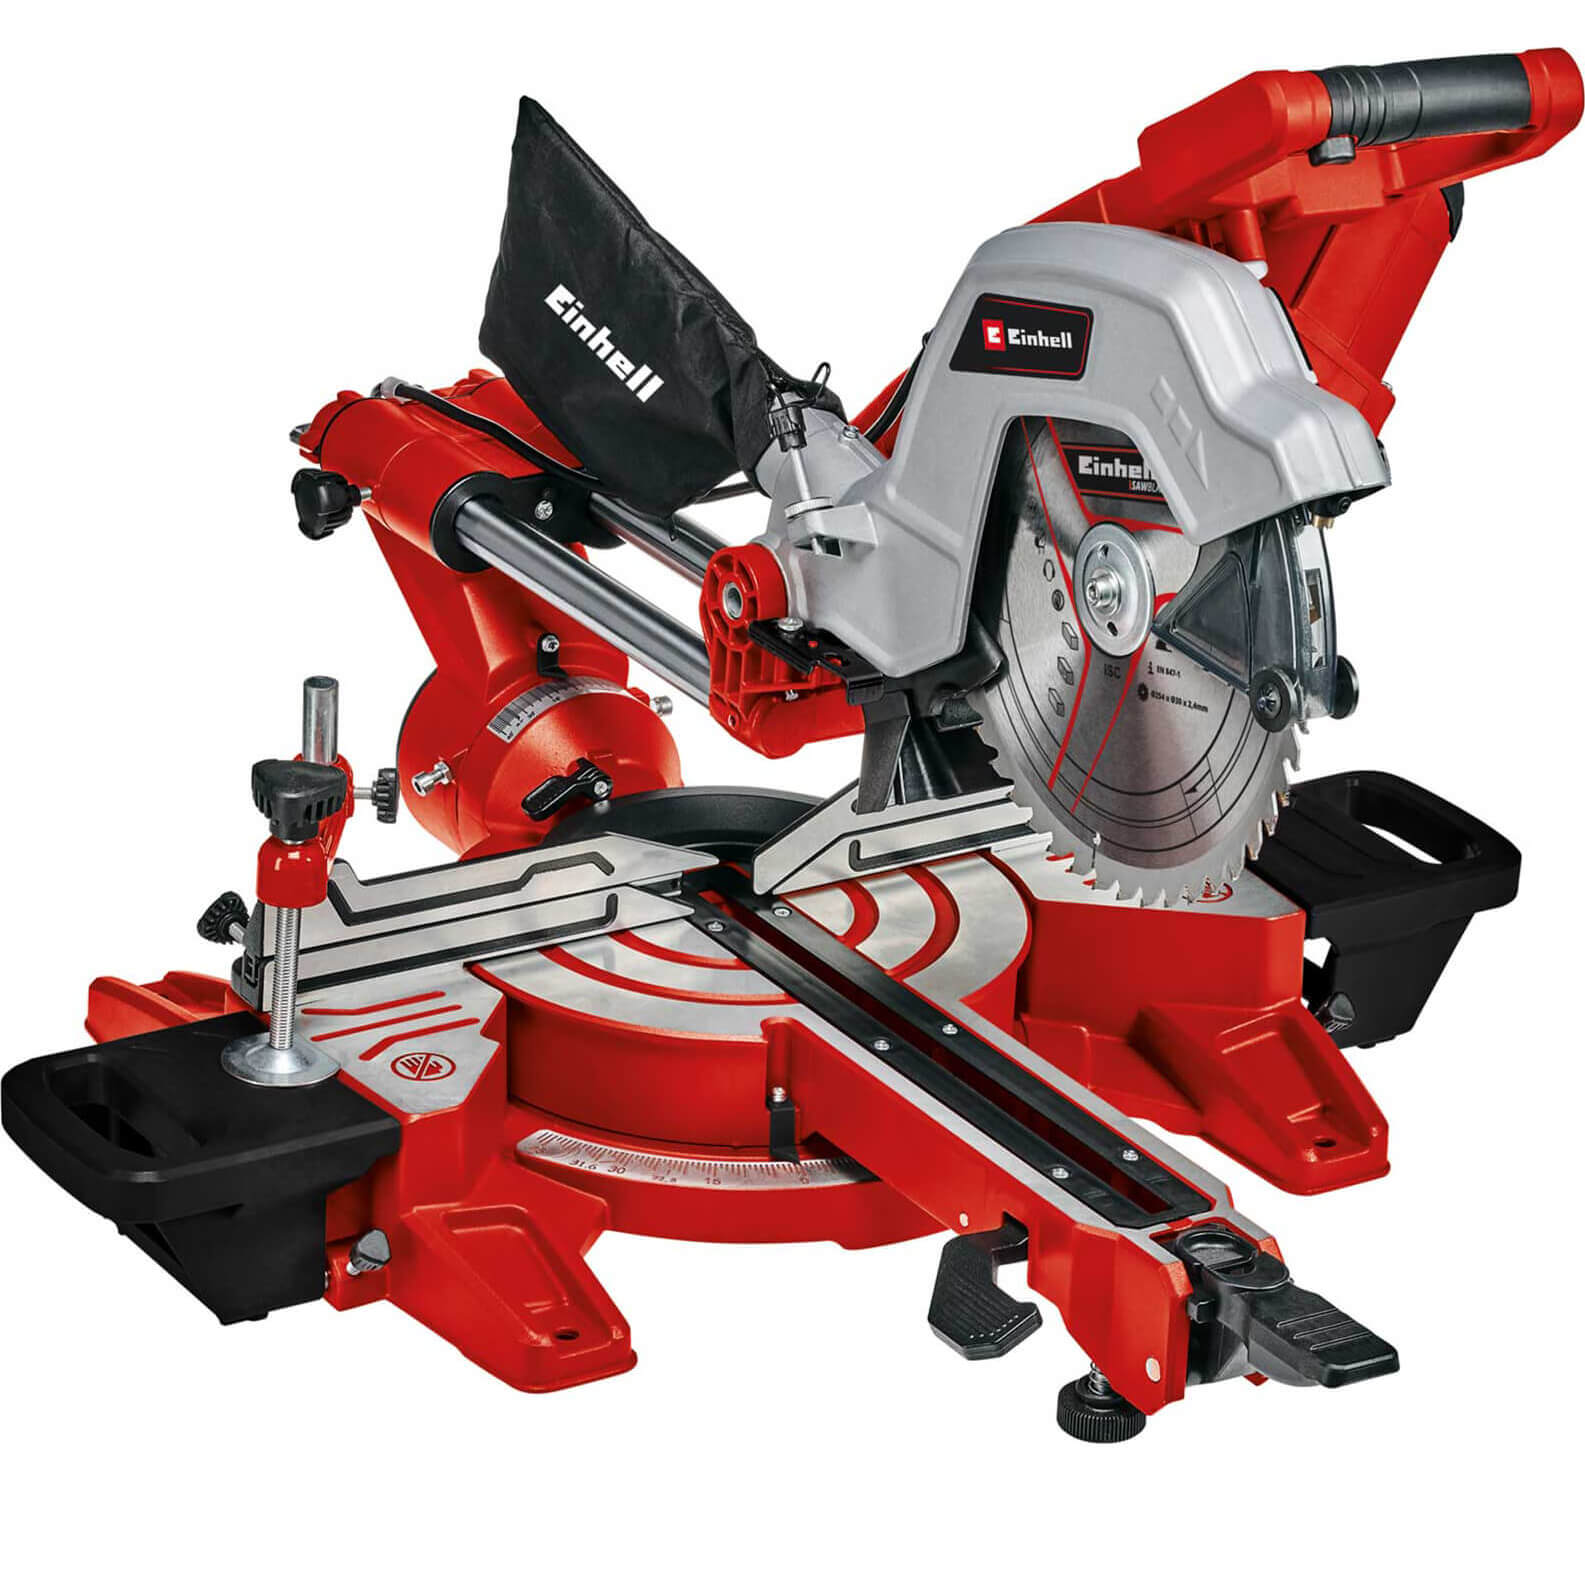 Image of Einhell TE-SM 254 Double Bevel Sliding Mitre Saw 254mm